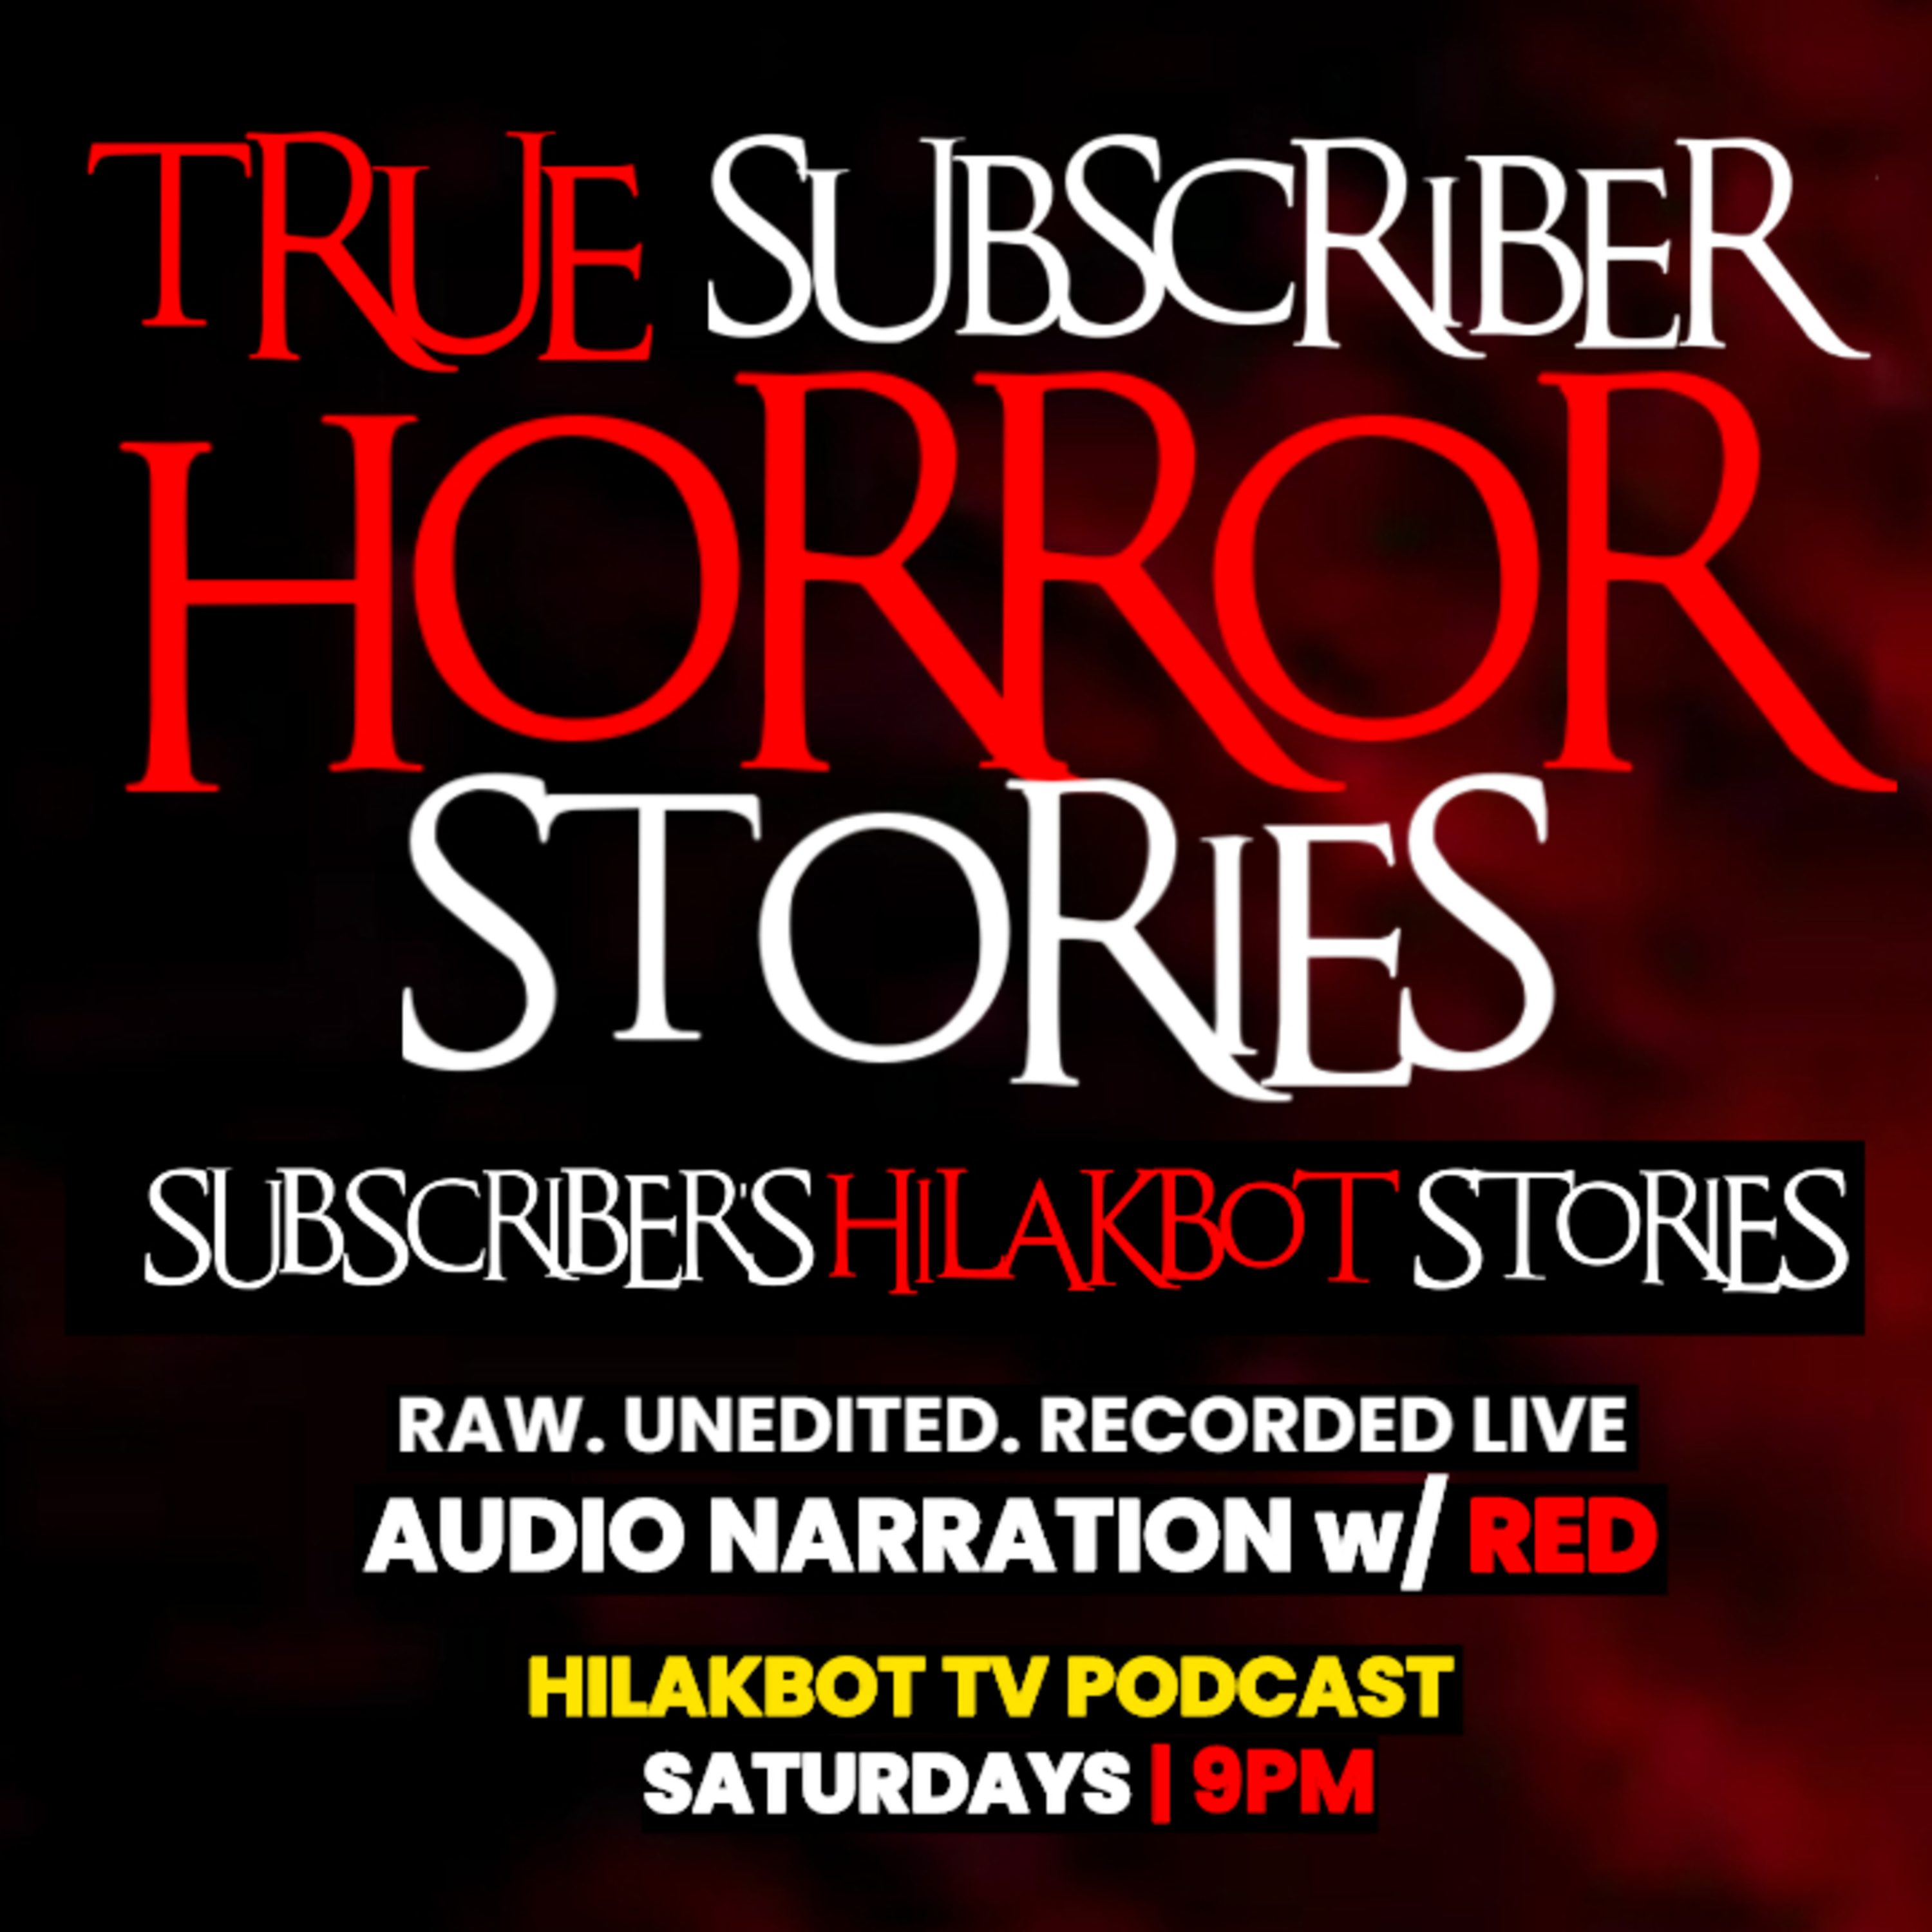 SUBSCRIBER'S HILAKBOT STORIES EPISODE 22 - Live Narration w/ RED | Listener's Submitted True Scary Stories